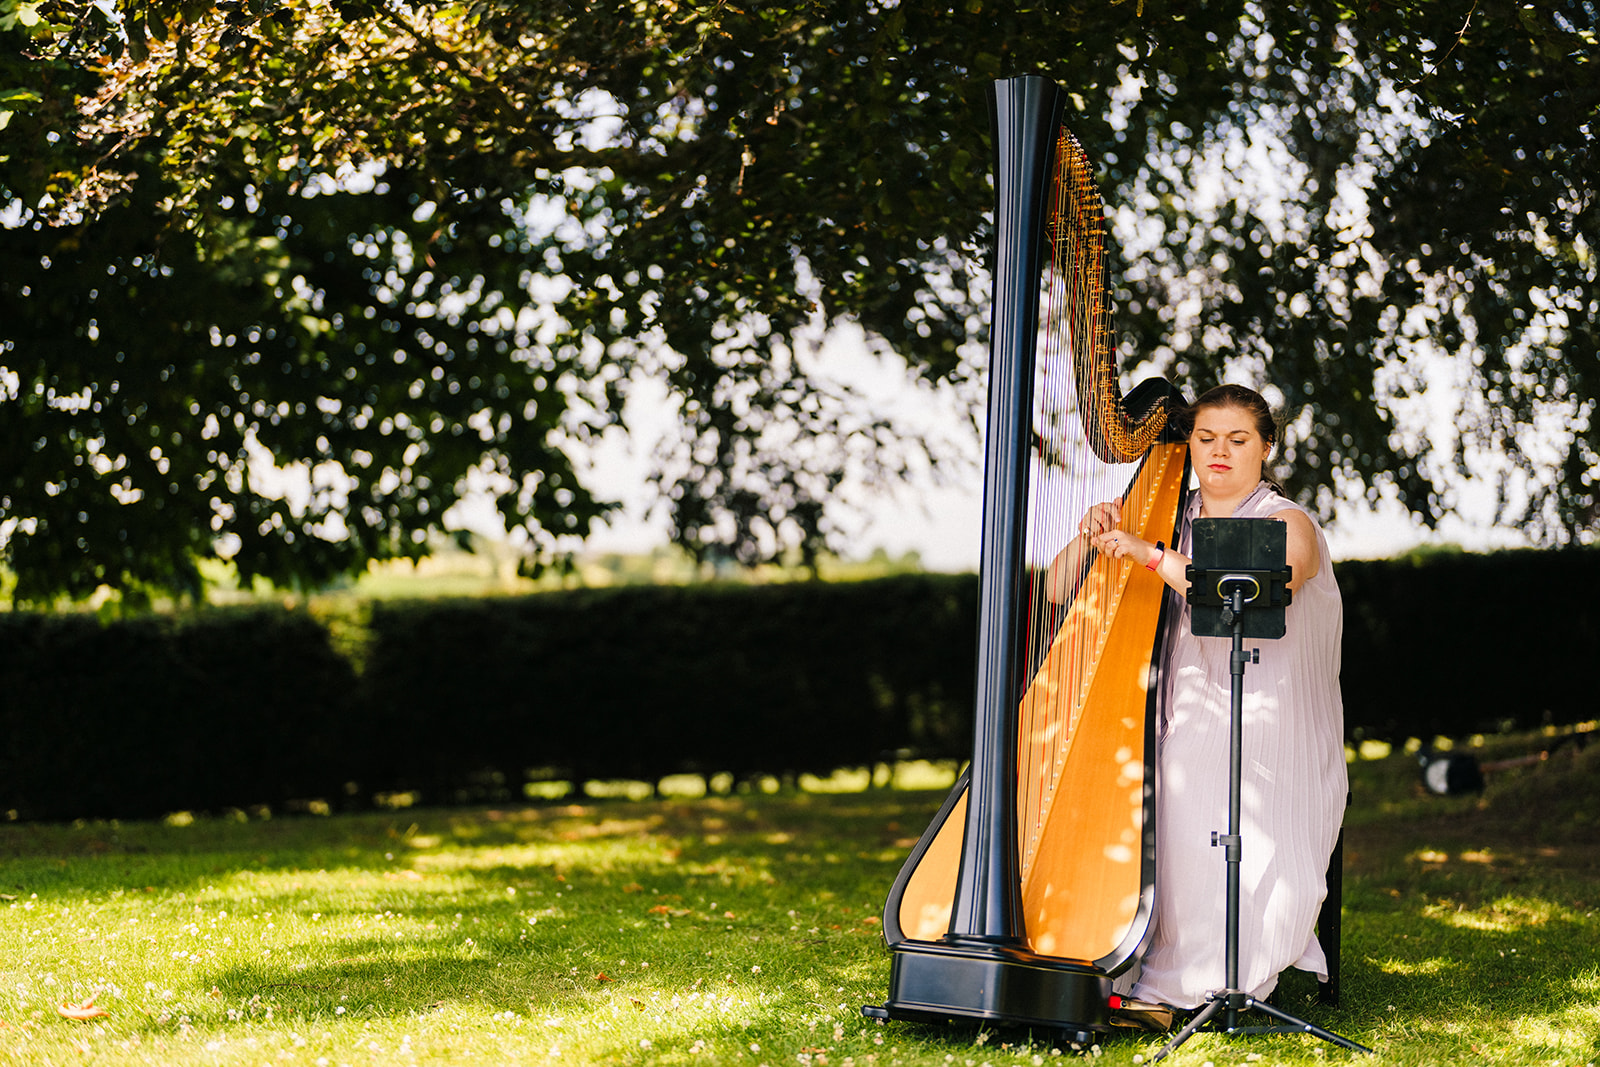 Shottle Hall Wedding Photography - a harpist playing music during the wedding ceremony